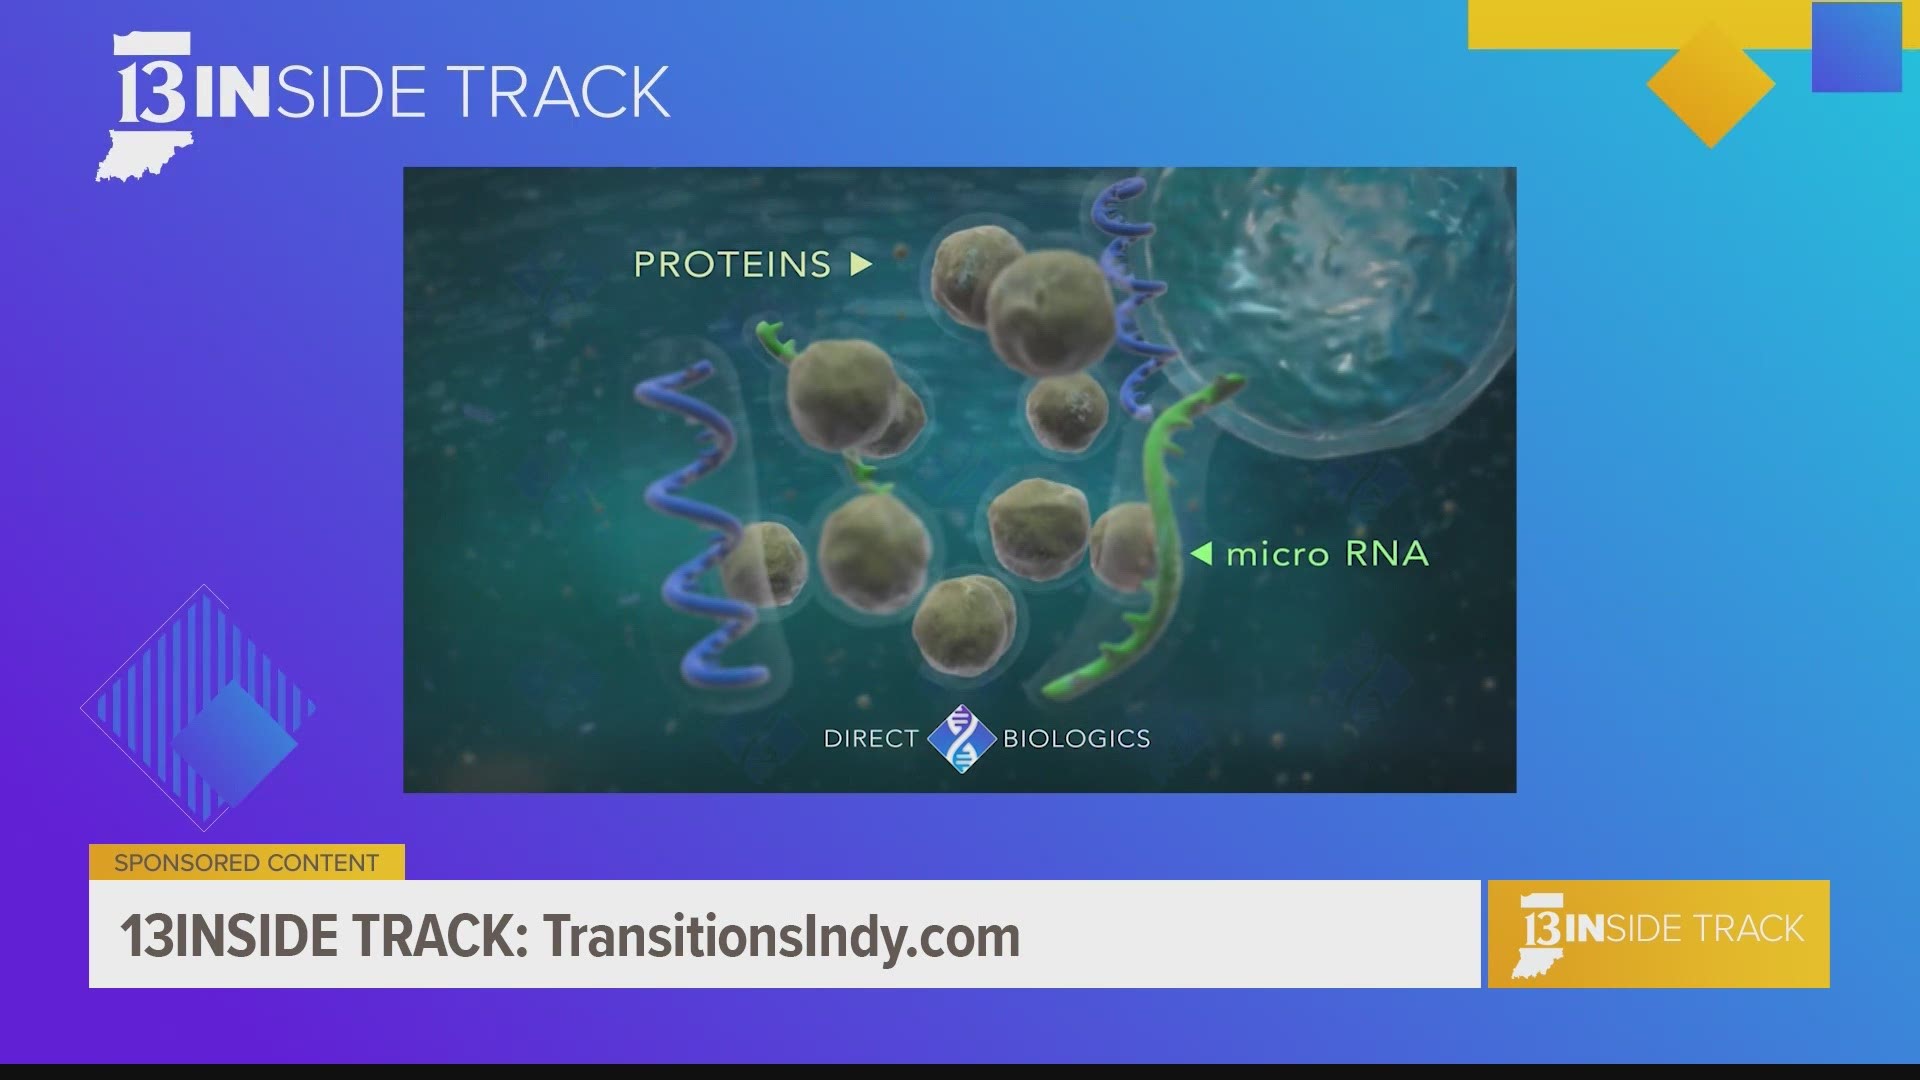 Transitions of Indiana says this brand new technology involving Exosomes has played a huge role in hair restoration treatments.